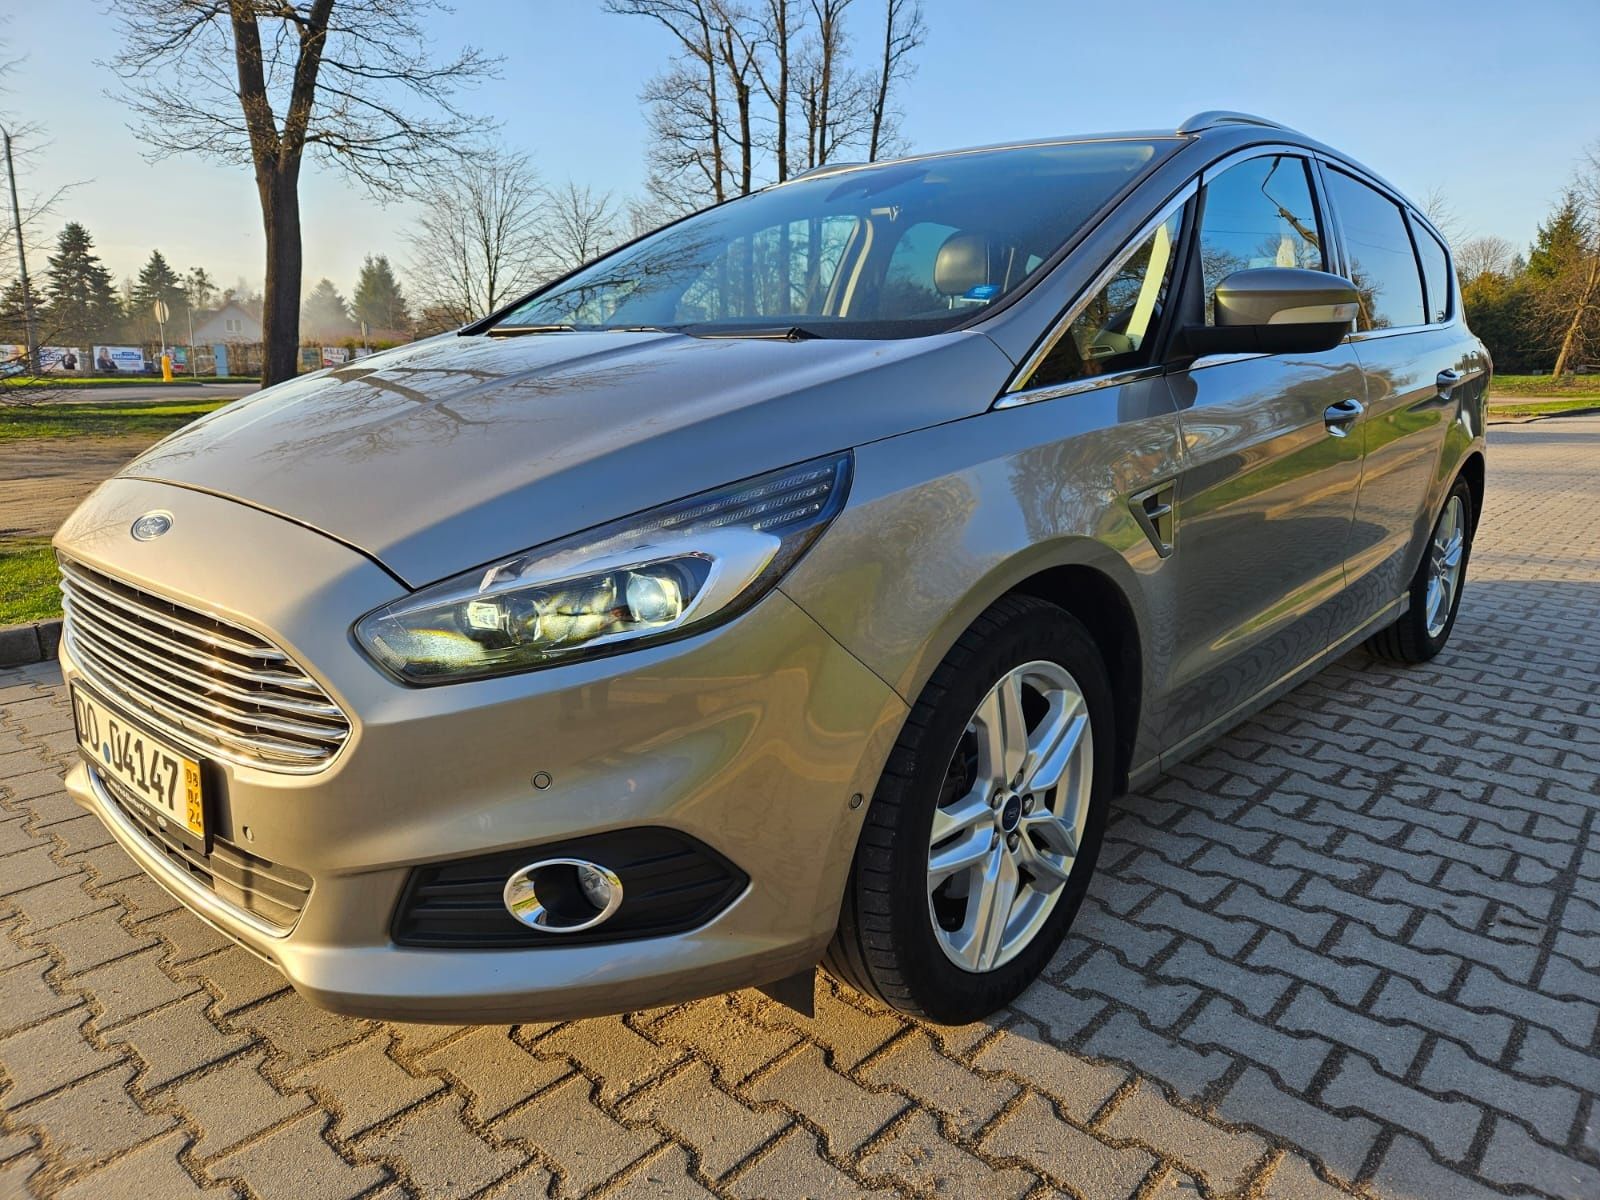 Ford S-Max 2.0T benzyna, 2017r. automat